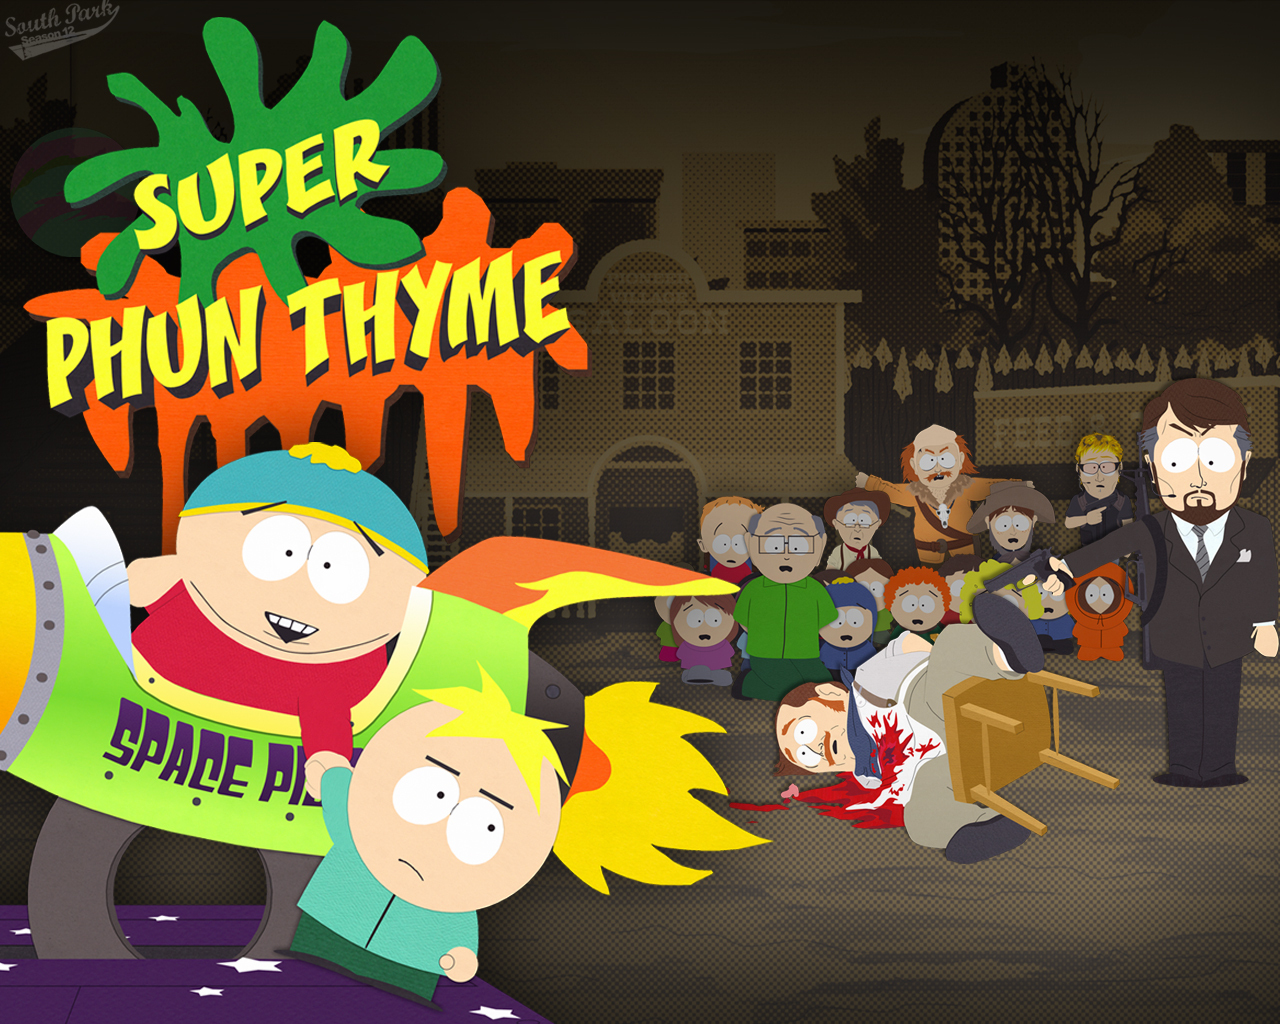 Funny South Park Wallpaper With Butters Image Amp Pictures